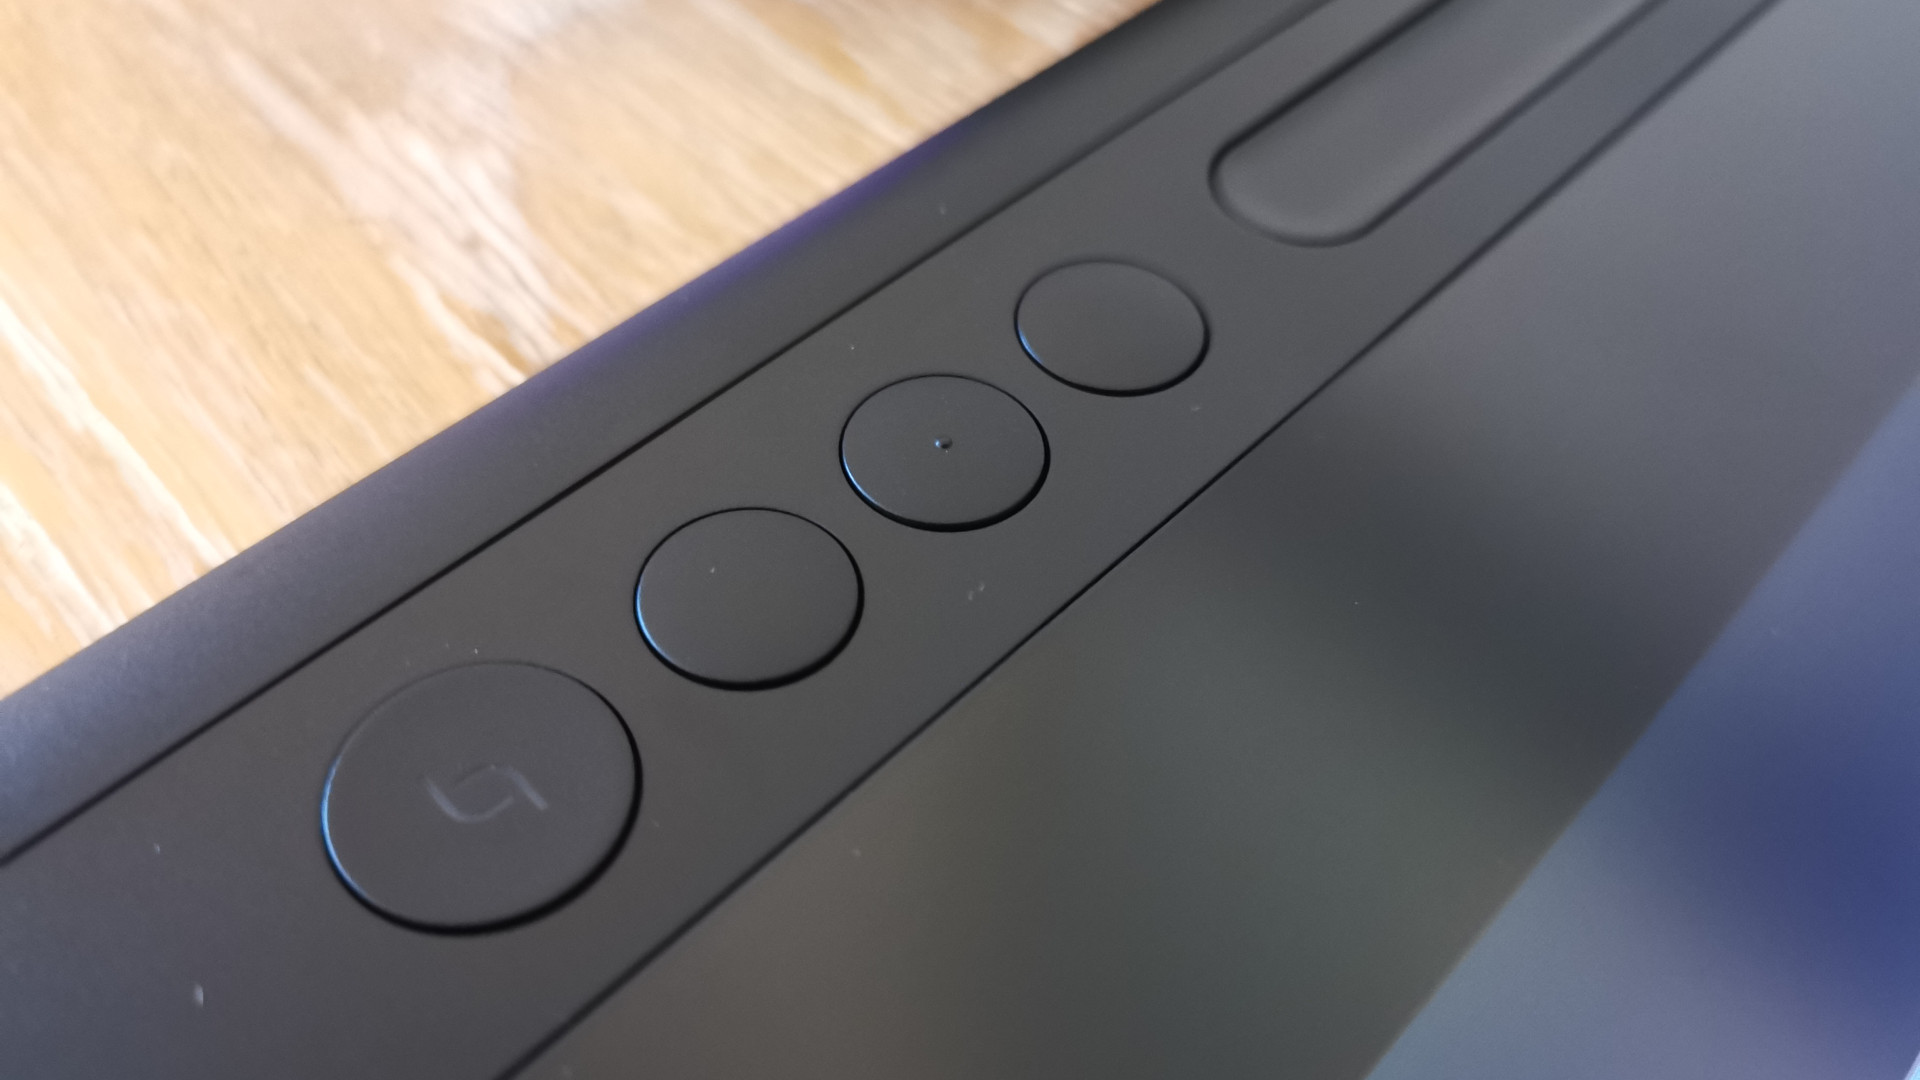 The lower buttons on the Huion Kamvas Pro 16